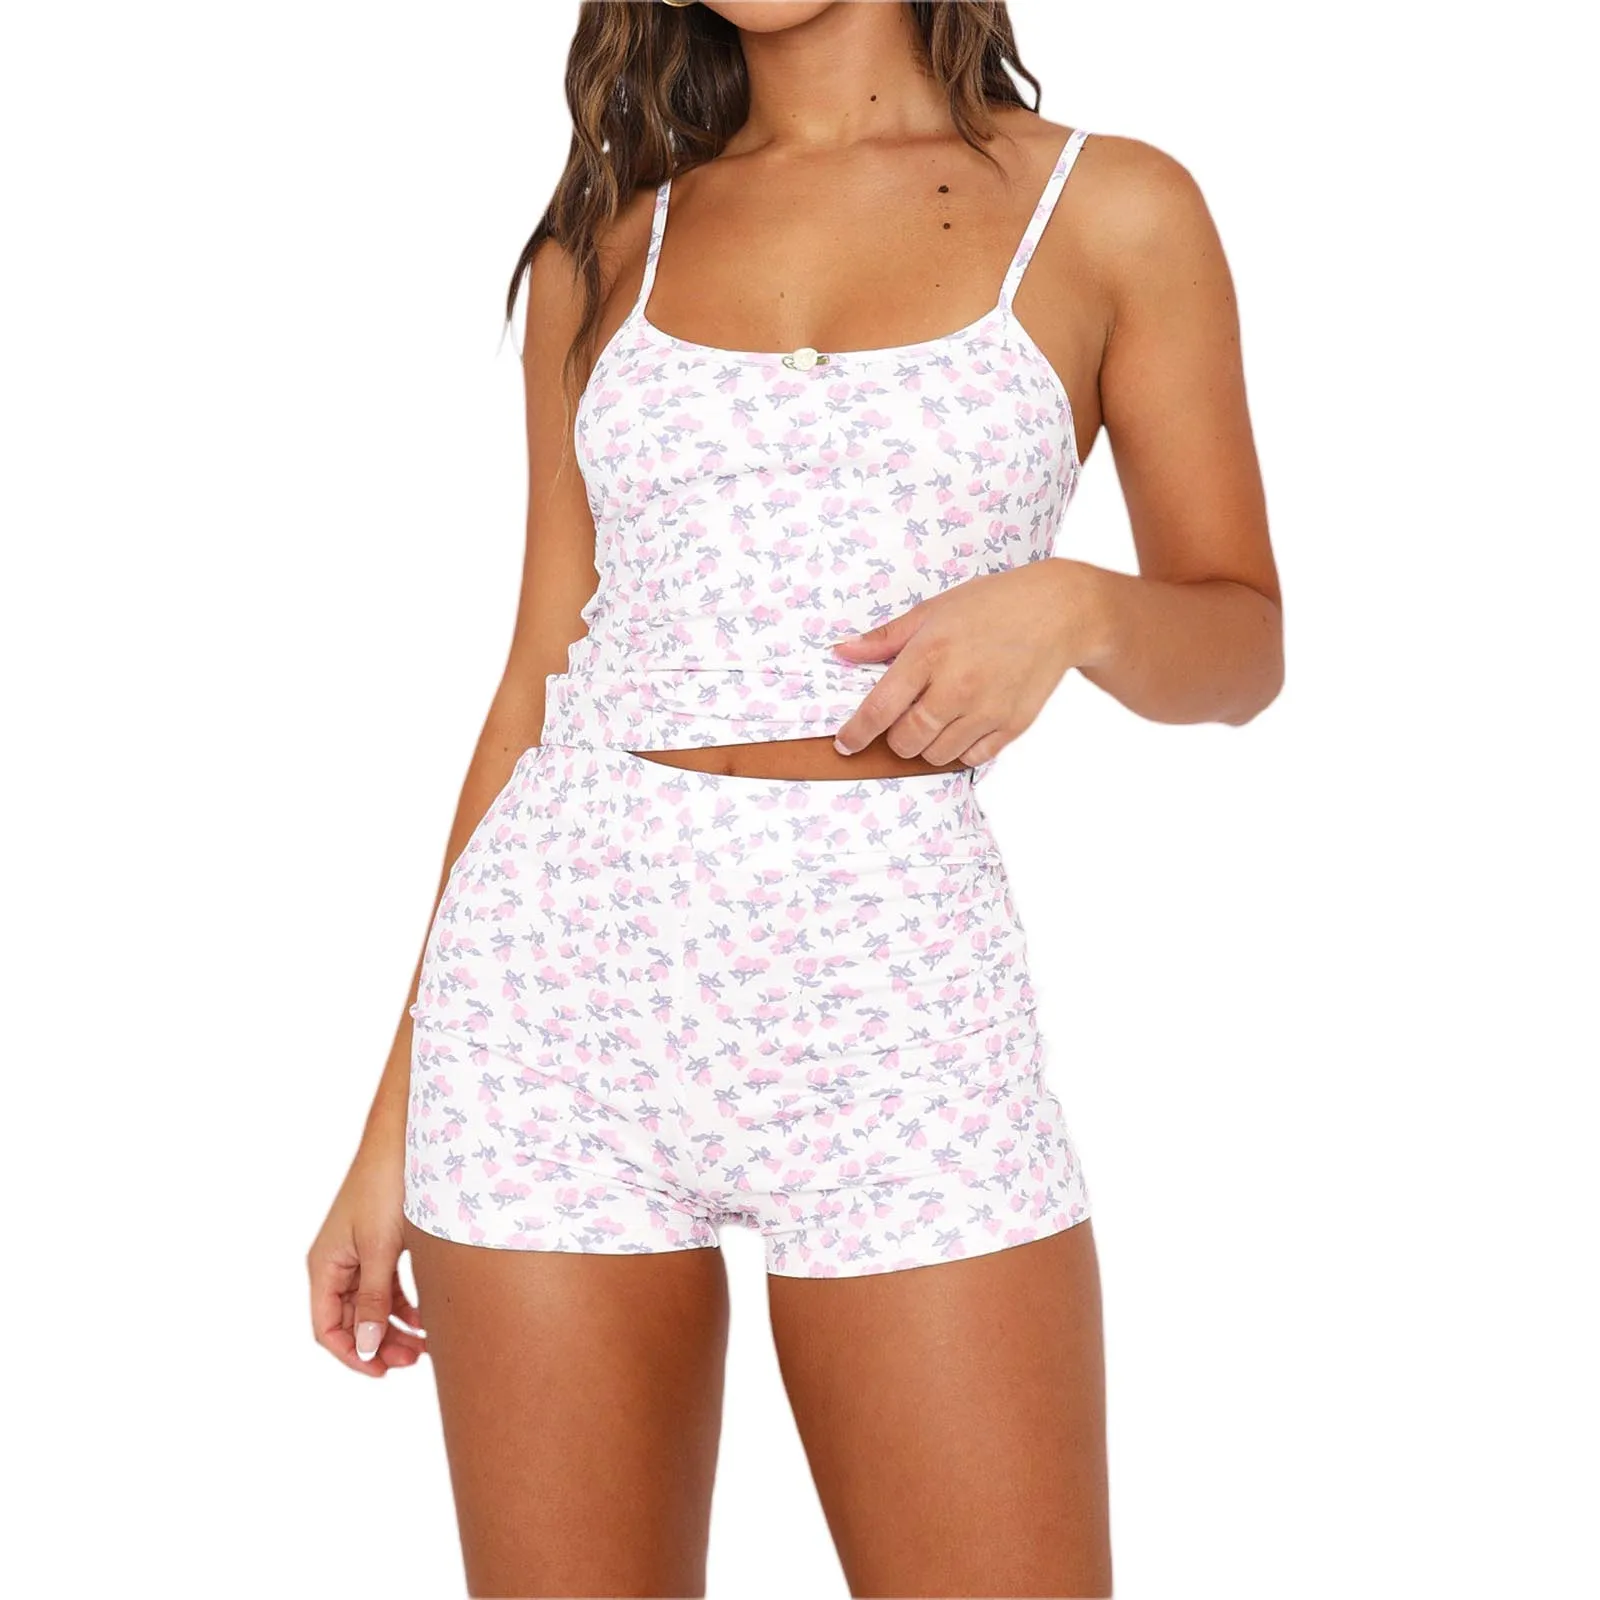 

Women 2 Piece Summer Outfits Cute Floral Print Crop Cami Tops + Shorts Pants Set Loungewear Female Casual Loungewear Tracksuit